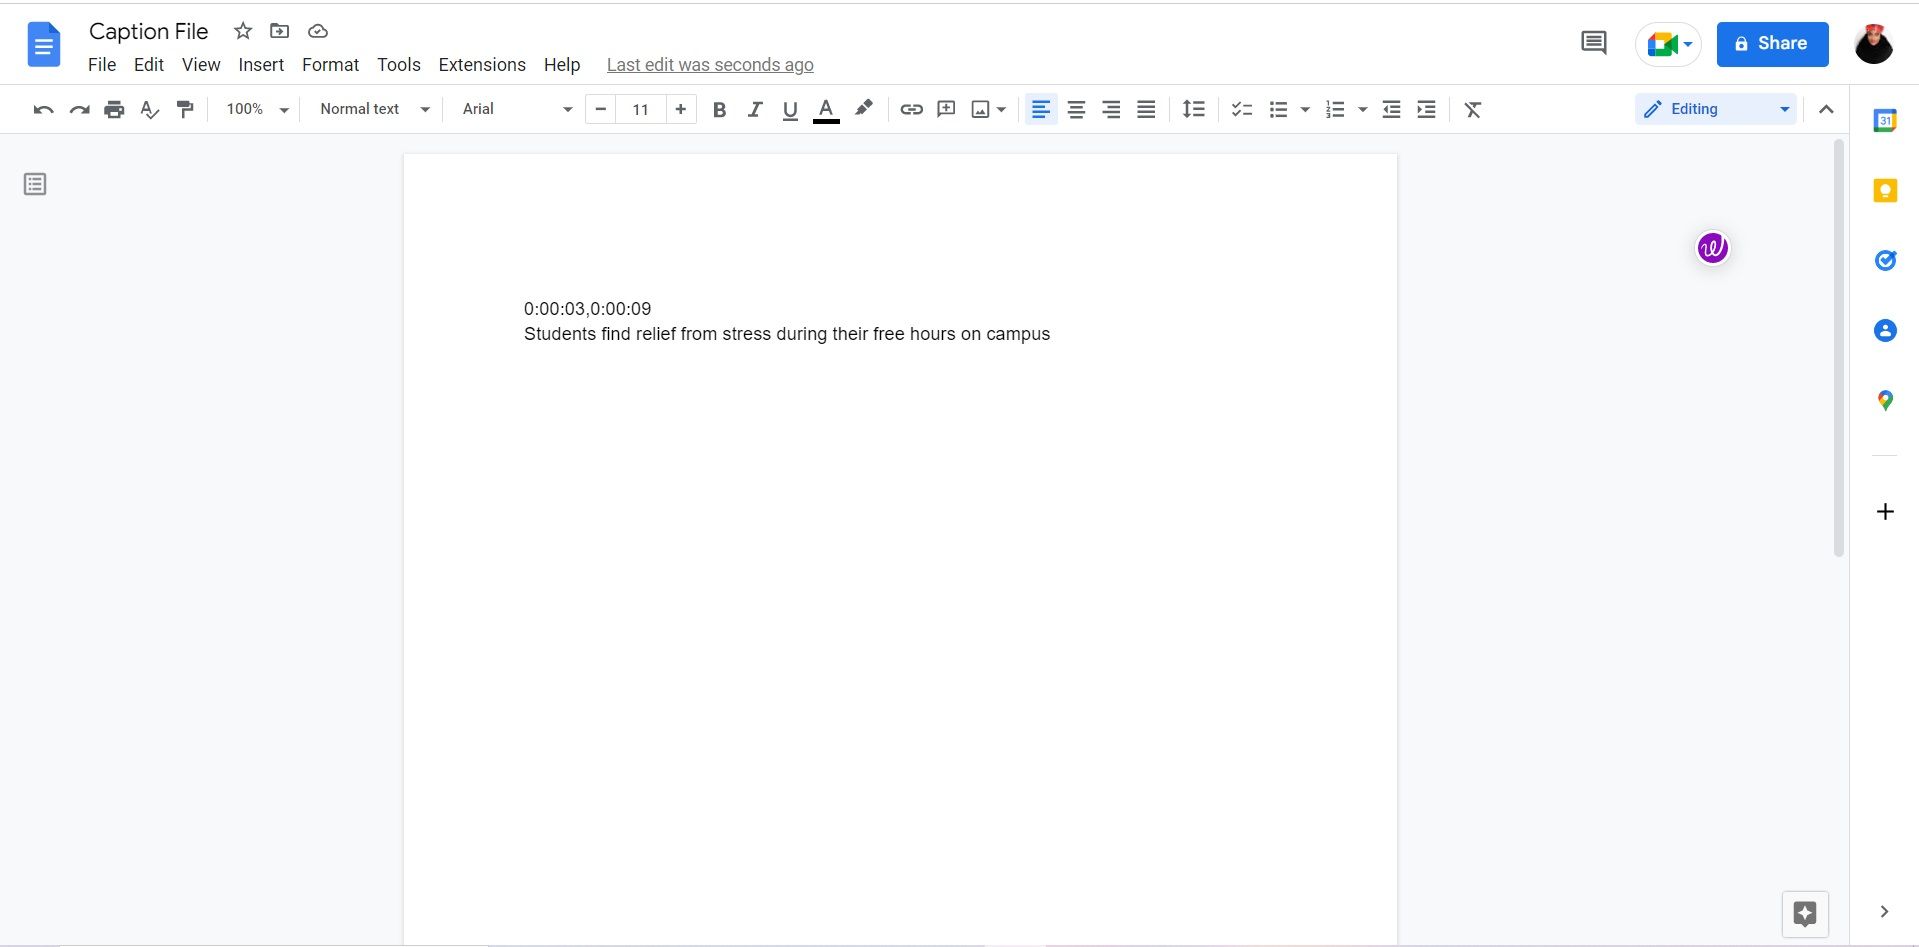 Creating a caption file in Google Docs